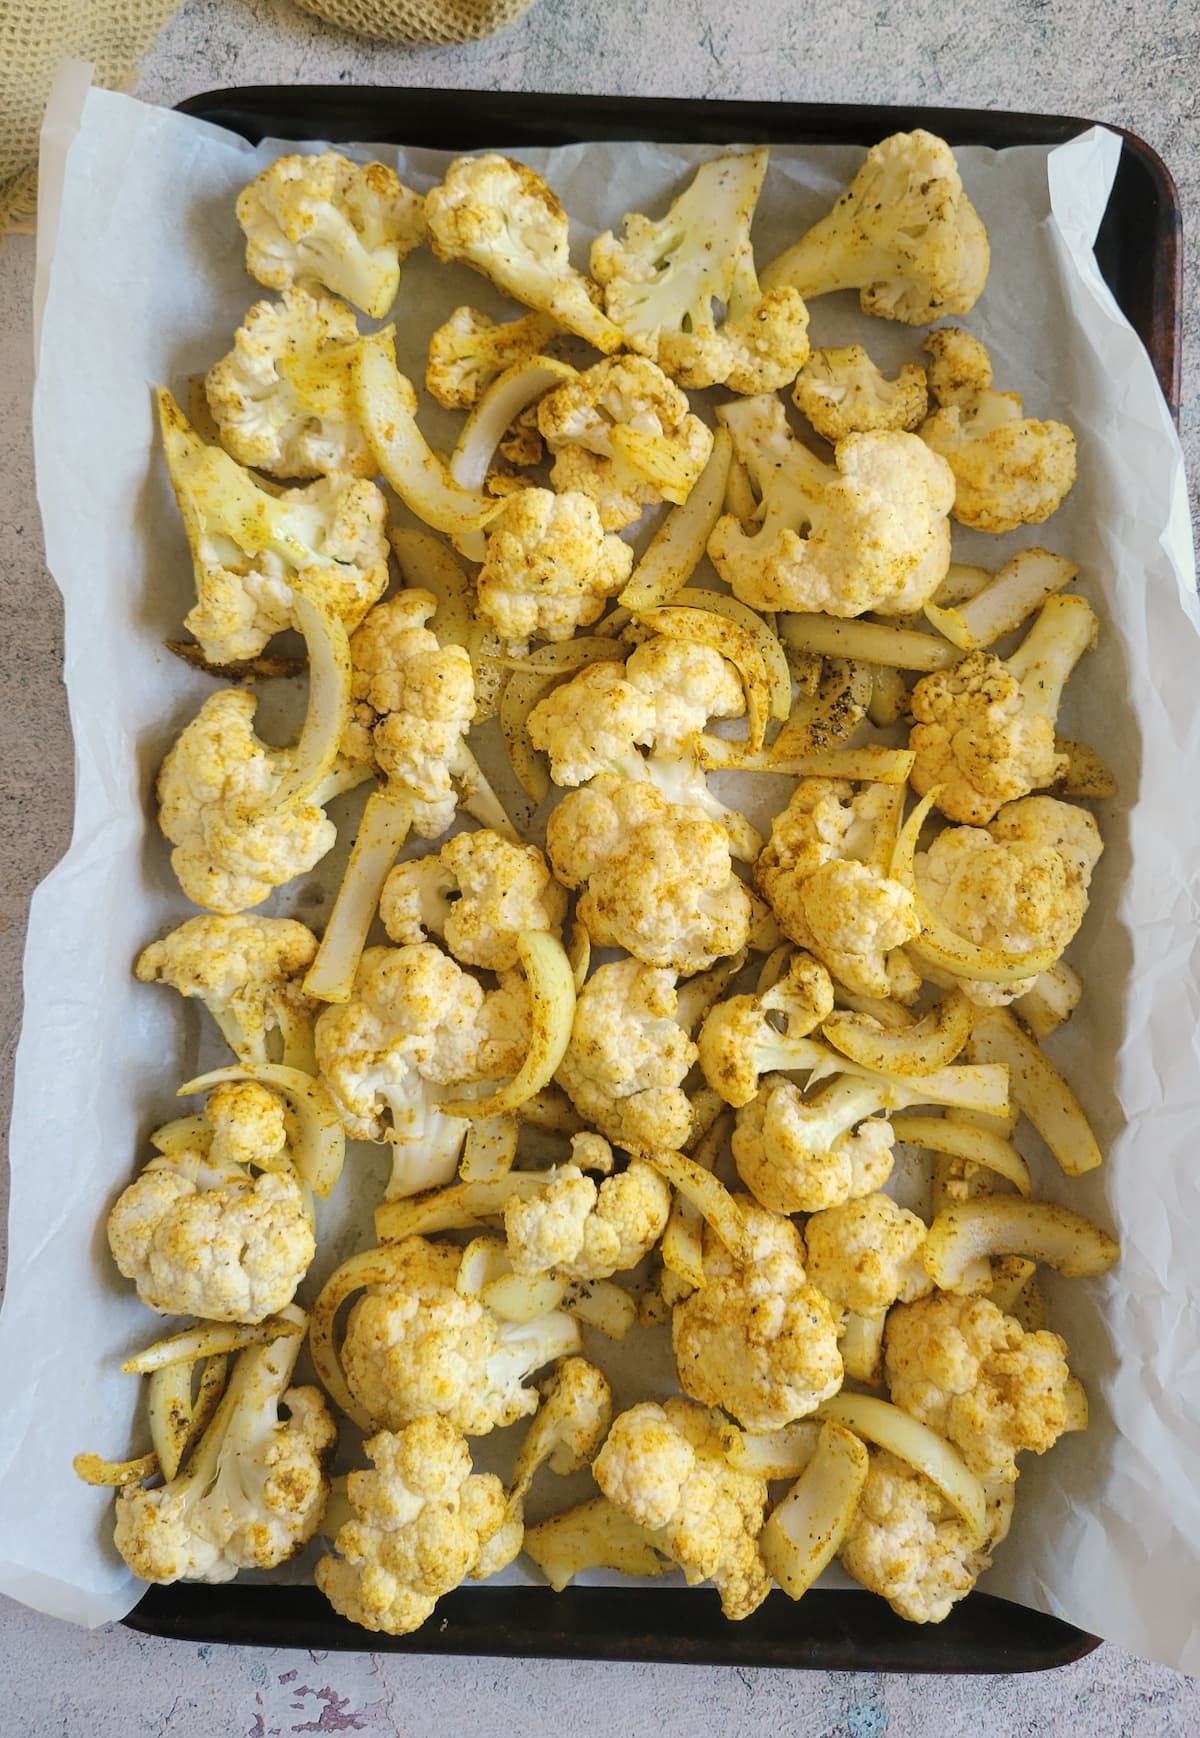 raw seasoned cauliflower florets and sliced white onions on a parchment lined baking sheet